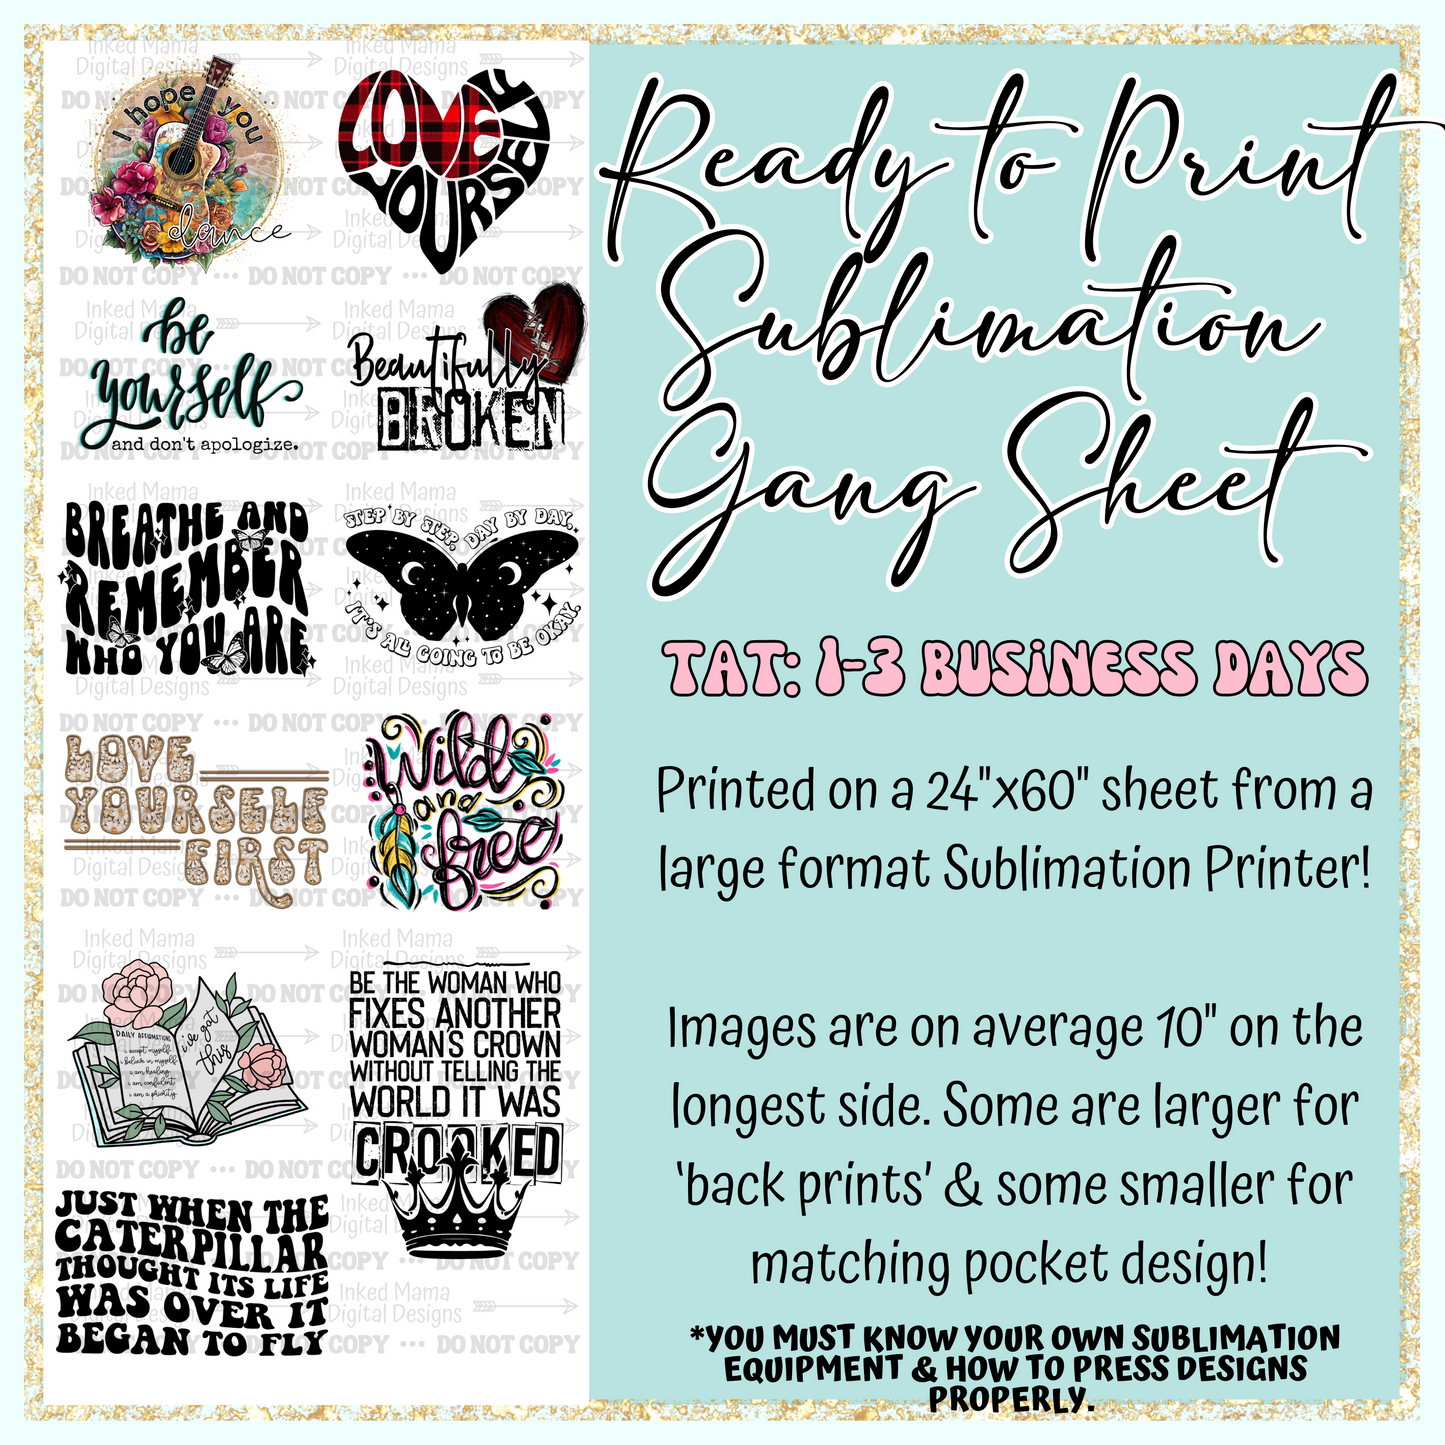 Love yourself Collection | Ready to Print Sublimation Gang Sheet